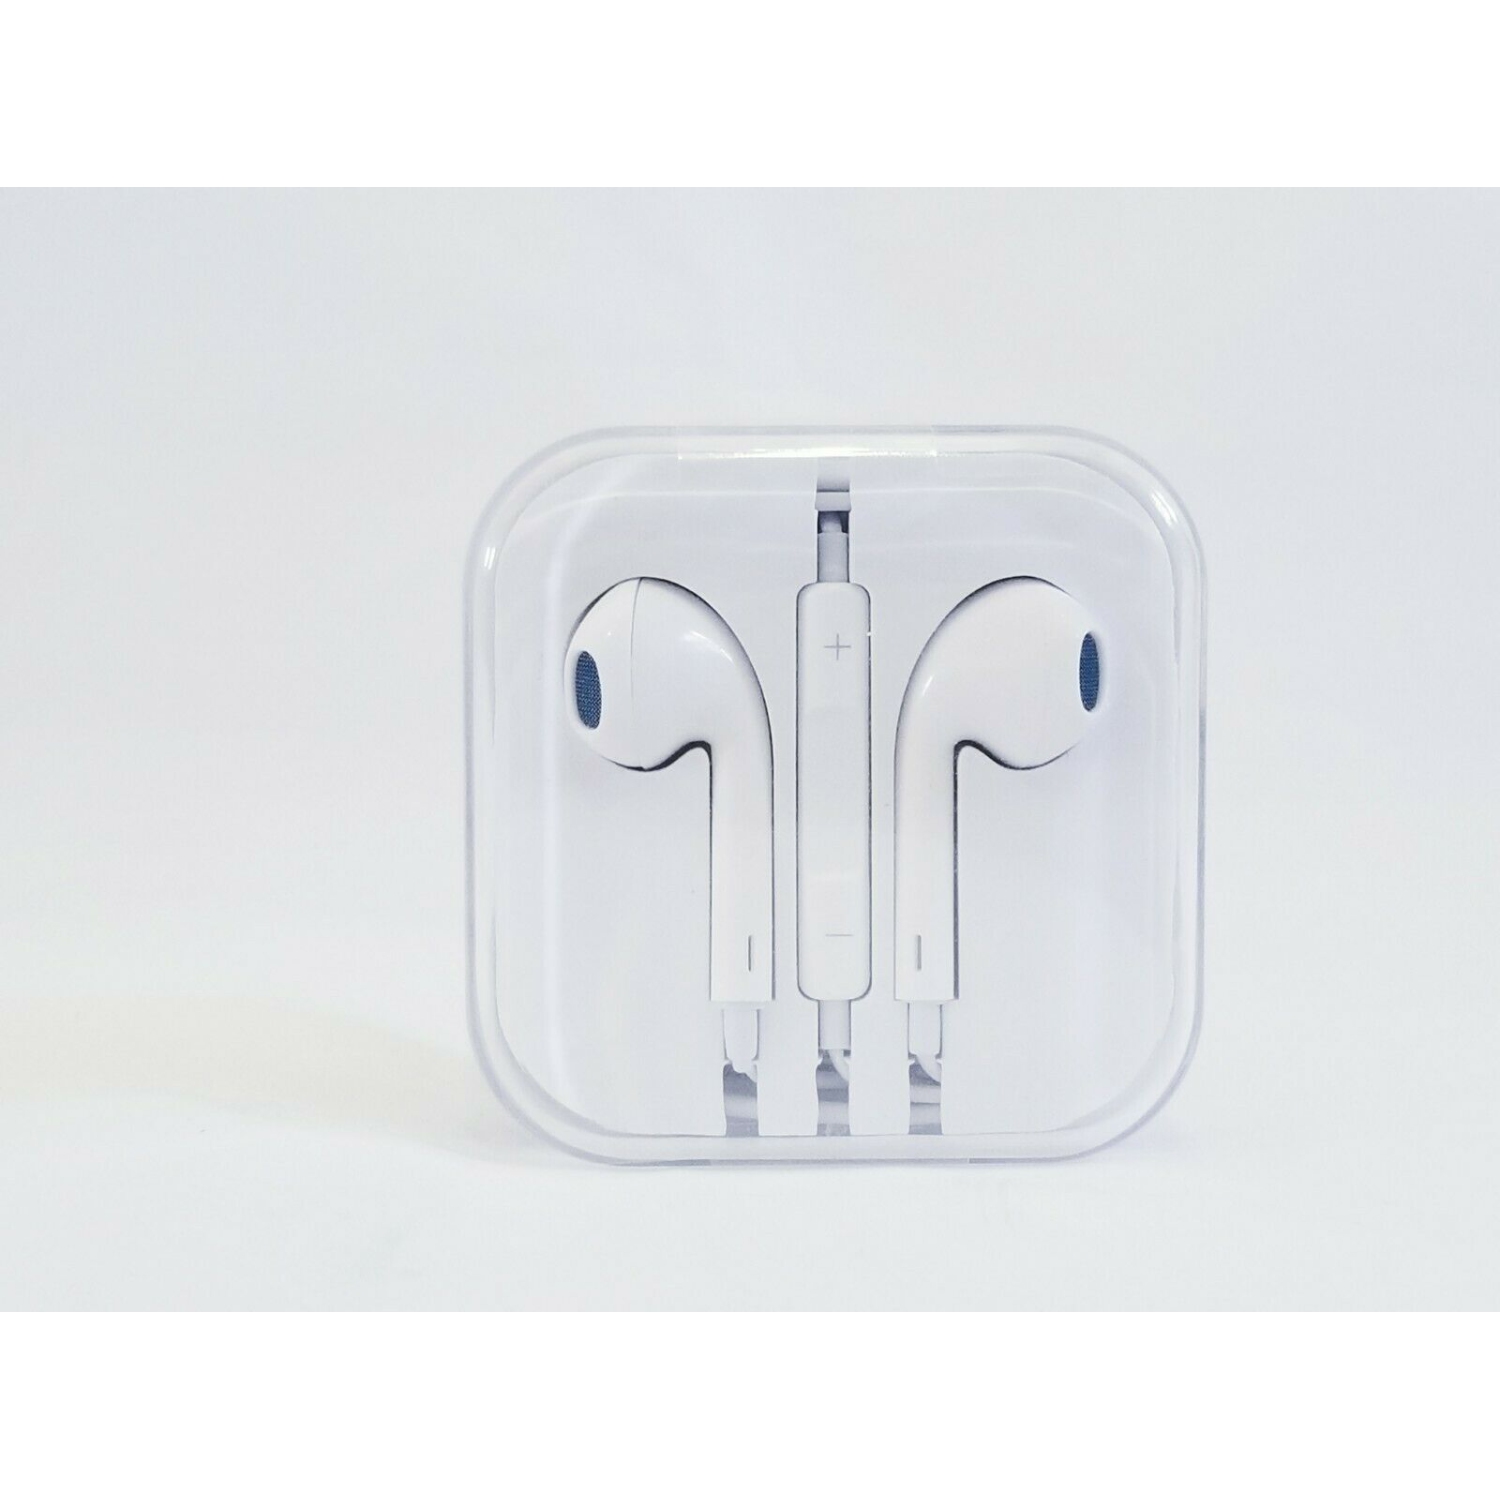 White Earphones for Samsung/ Apple iPhone 4, 5, 6 Headphones With Mic and volume